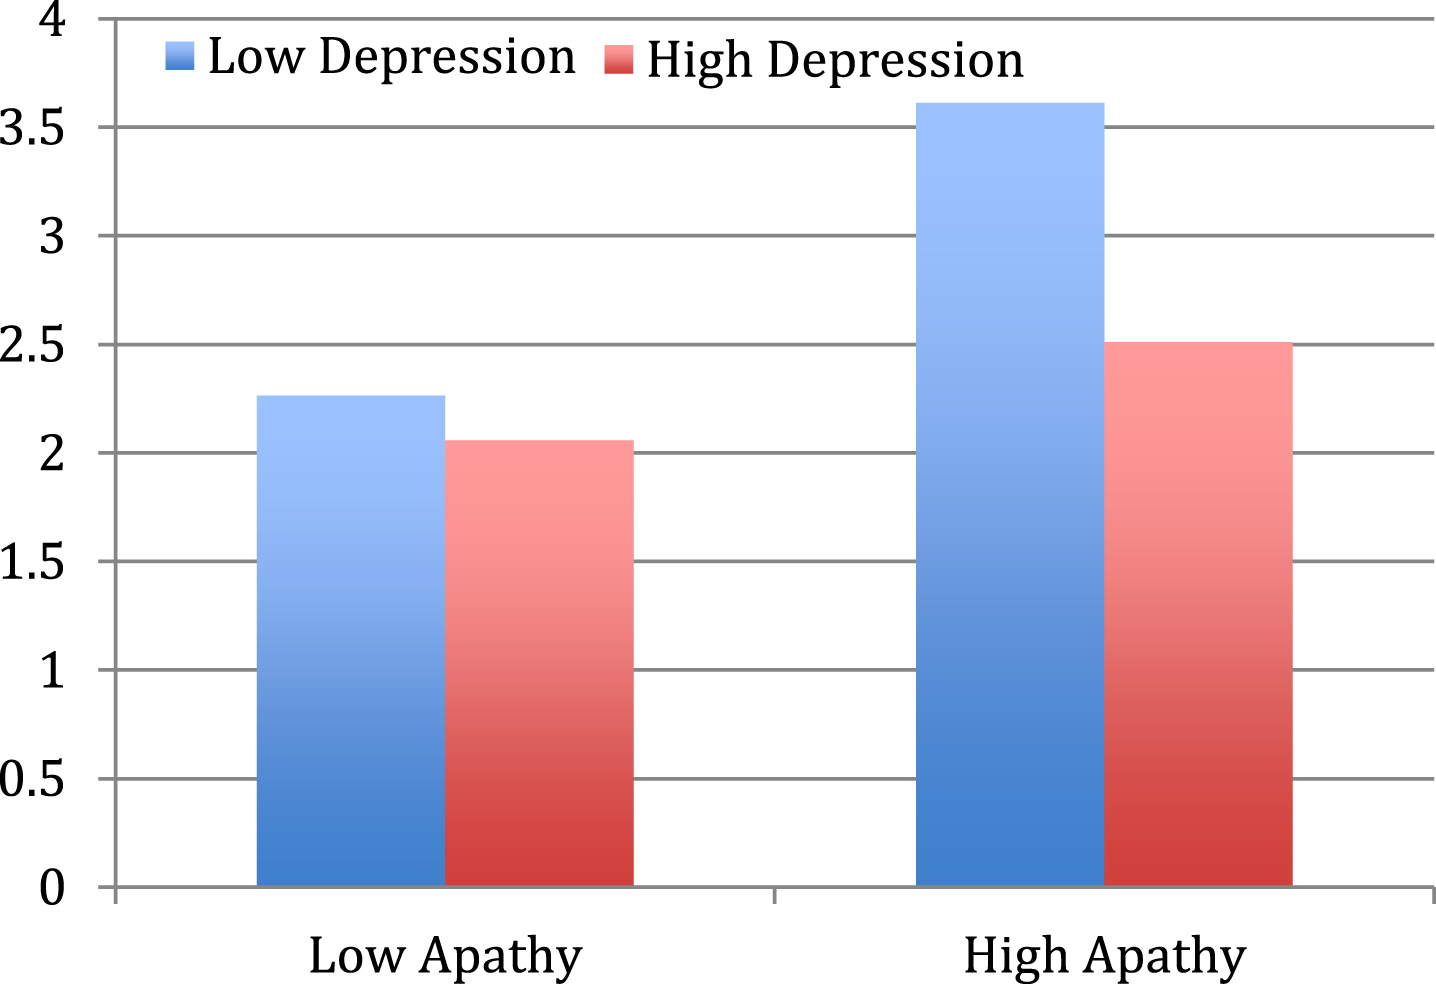 Behavioral indications of Pleasure comparisons between Apathy and Depression Groups.